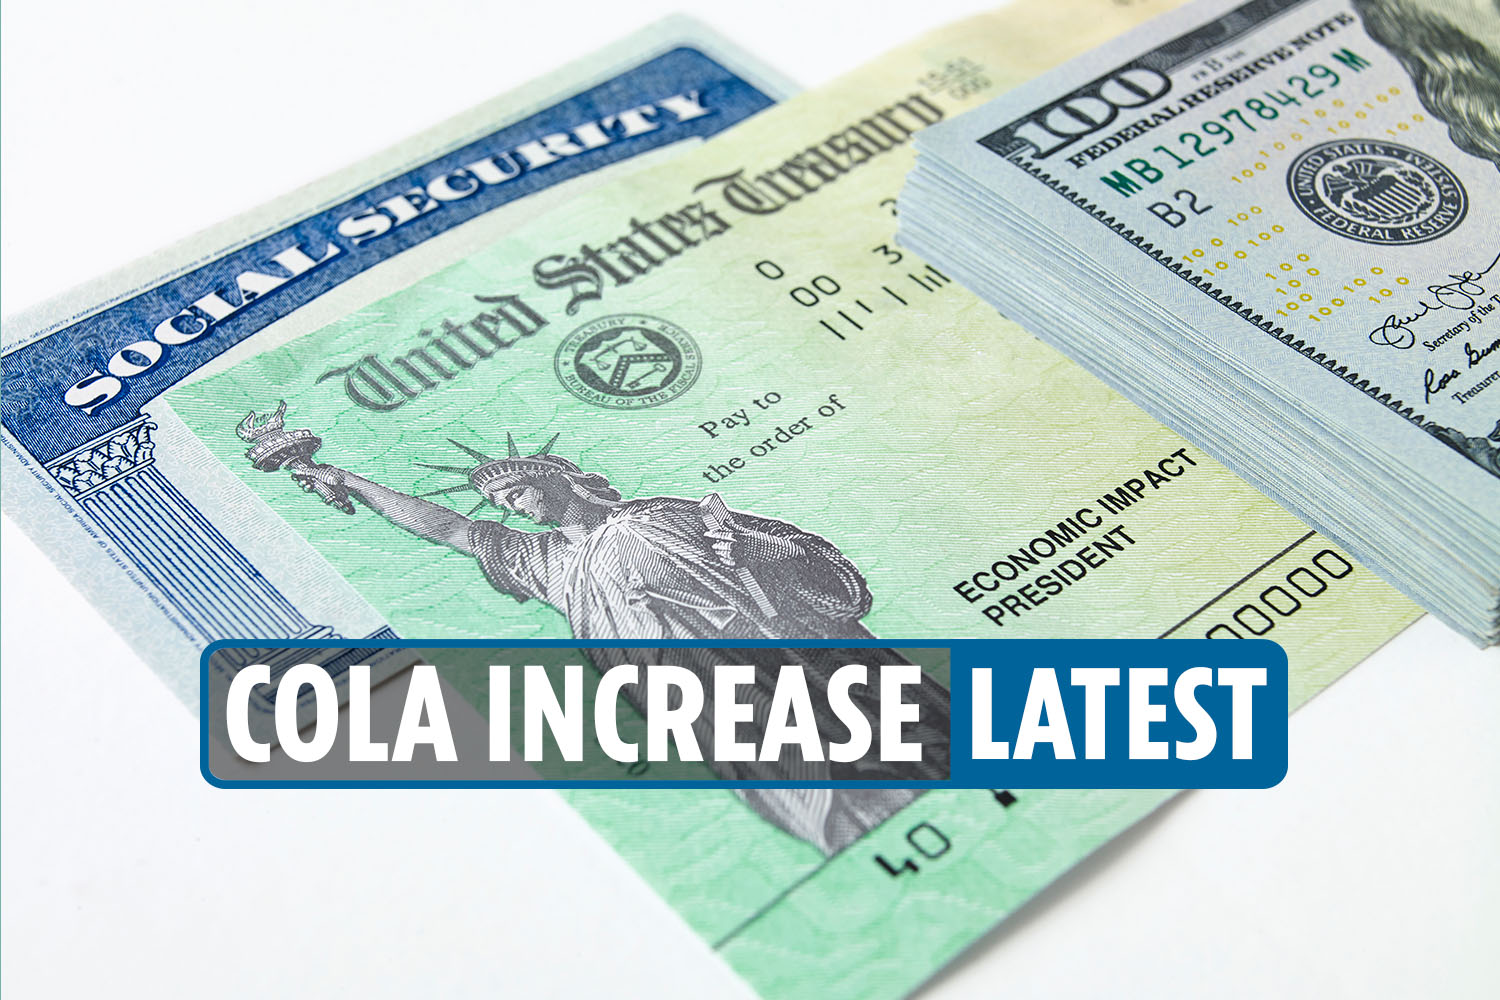 New COLA checks worth up to $4,194 sent out after extra $200 payments arrive